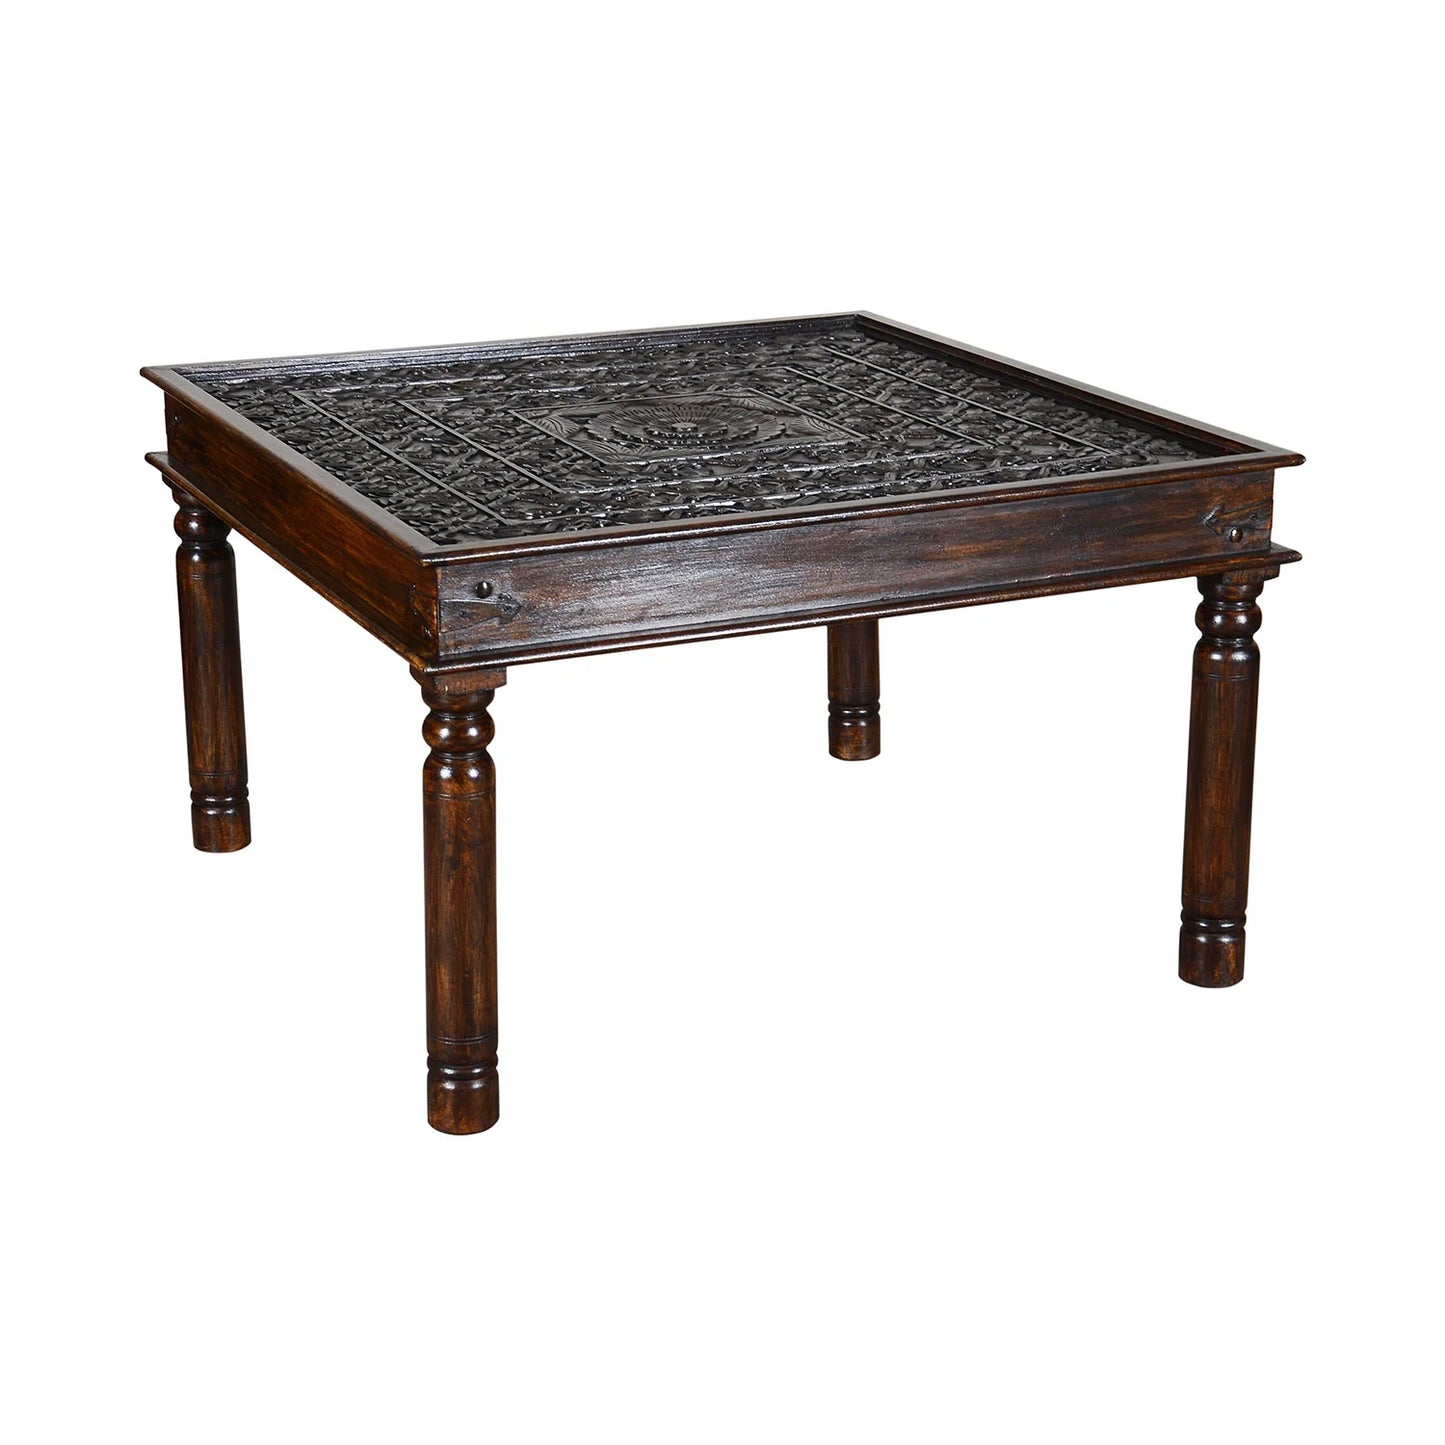 Rustic Intricate Carved Wooden Coffee Table